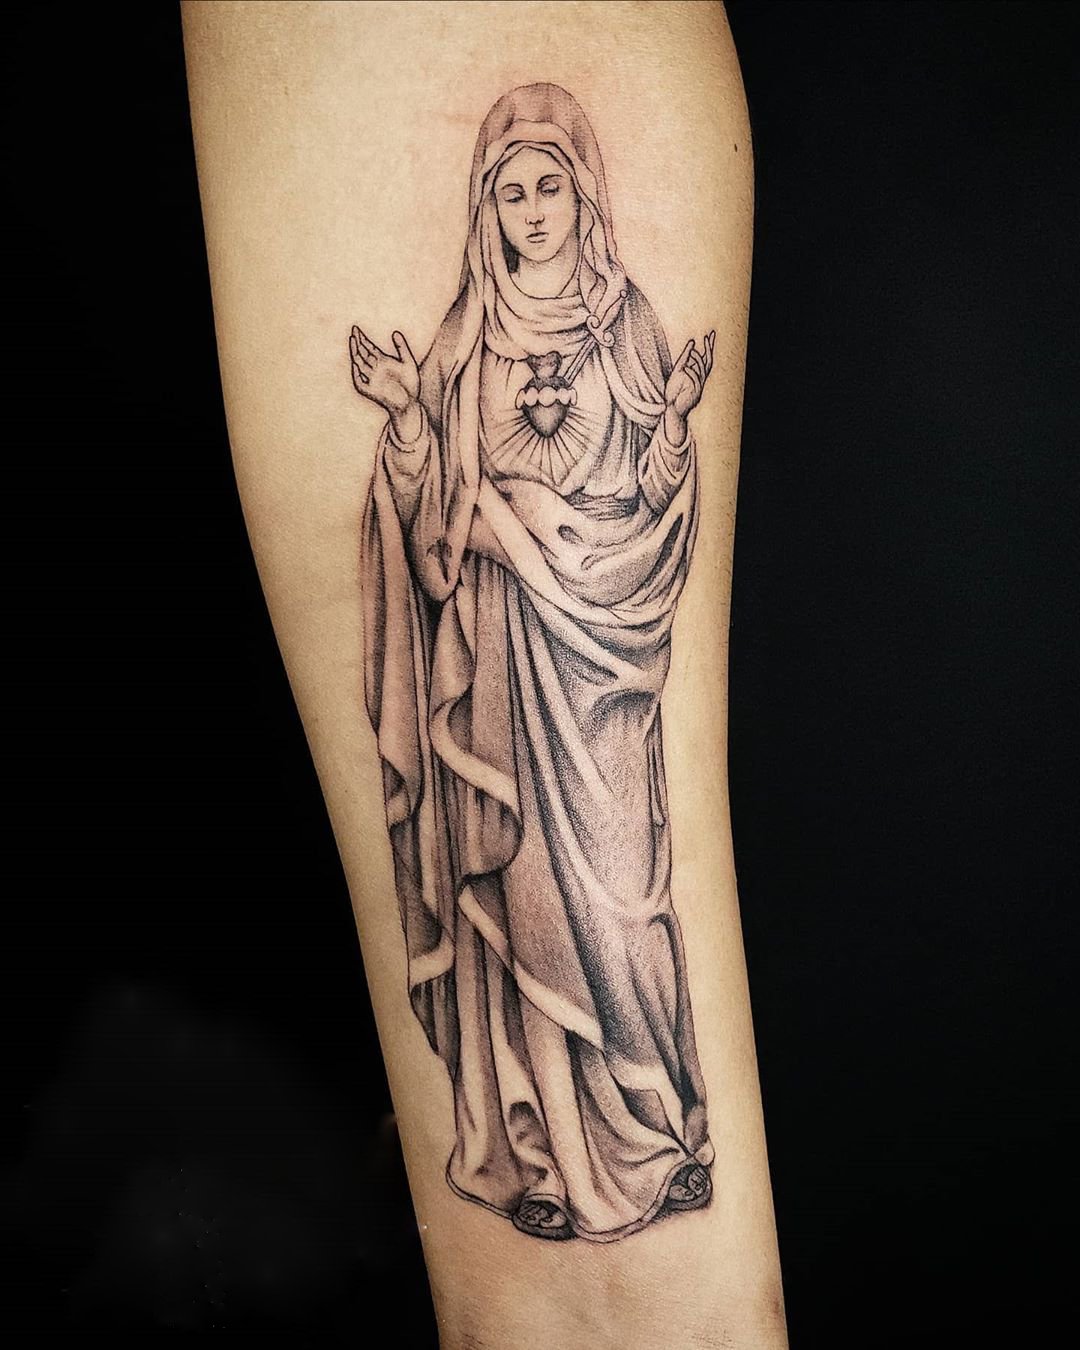 Chicano Virgin Mary Tattoo by PatongTattoocom  WhatsApp  Thank you to a  goalkeeper from Málaga CF trusting in our work Virgin Mary Tattoo   TATTOO INQUIRIES CONTACT US  Website wwwPatongTattoocom 